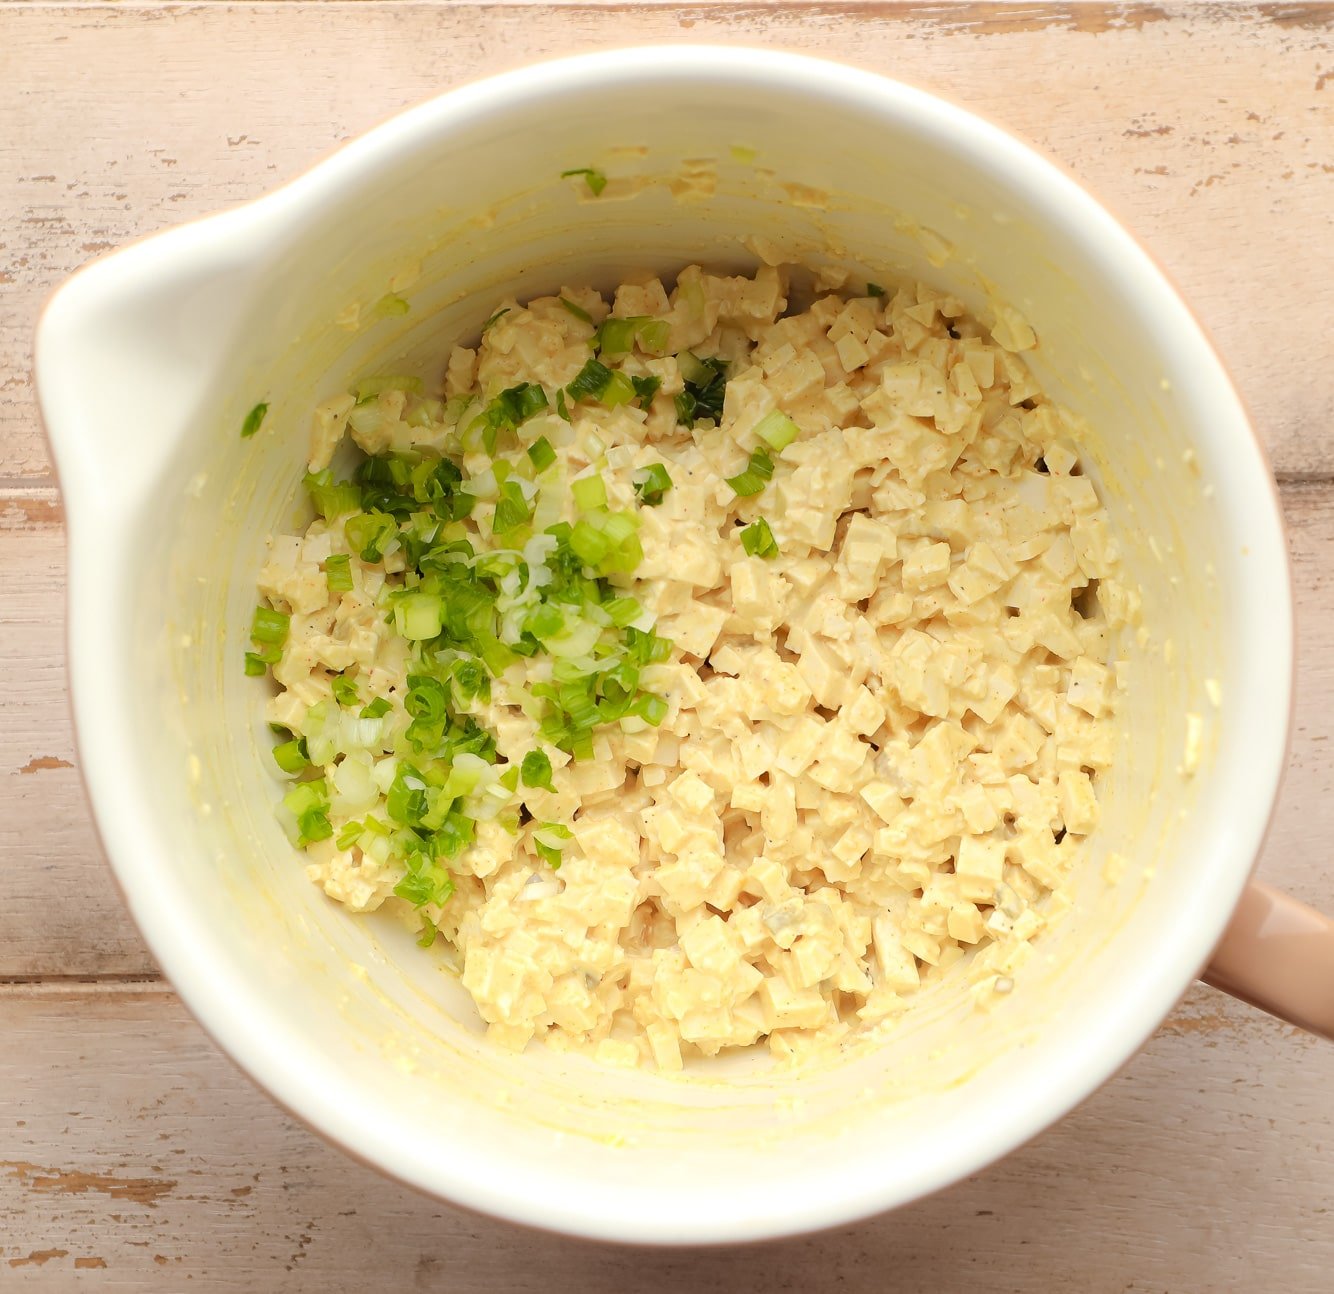 vegan egg salad topped with scallions in a large white bowl.